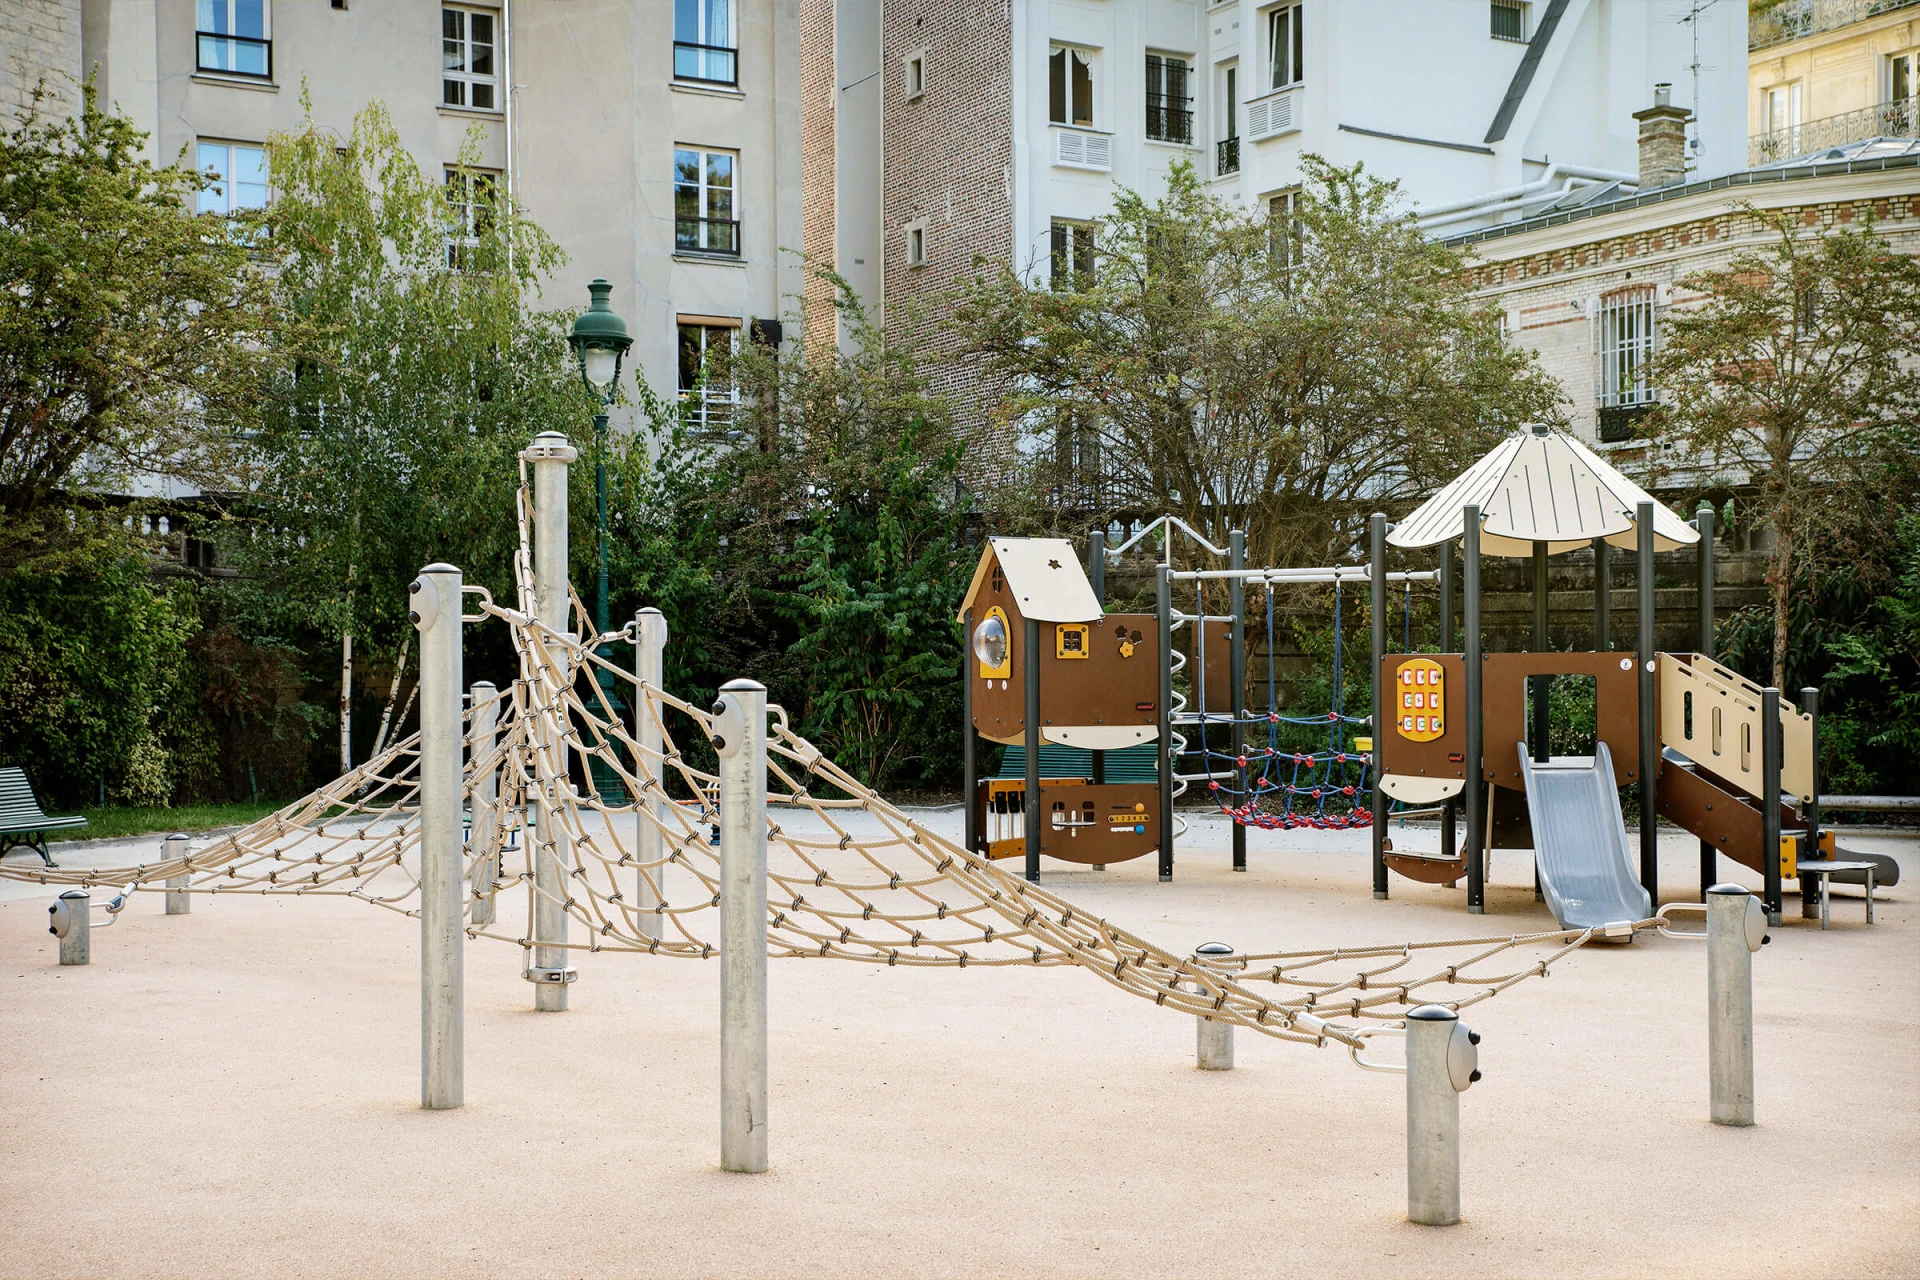 Playground with play tower at Square Capitan, France